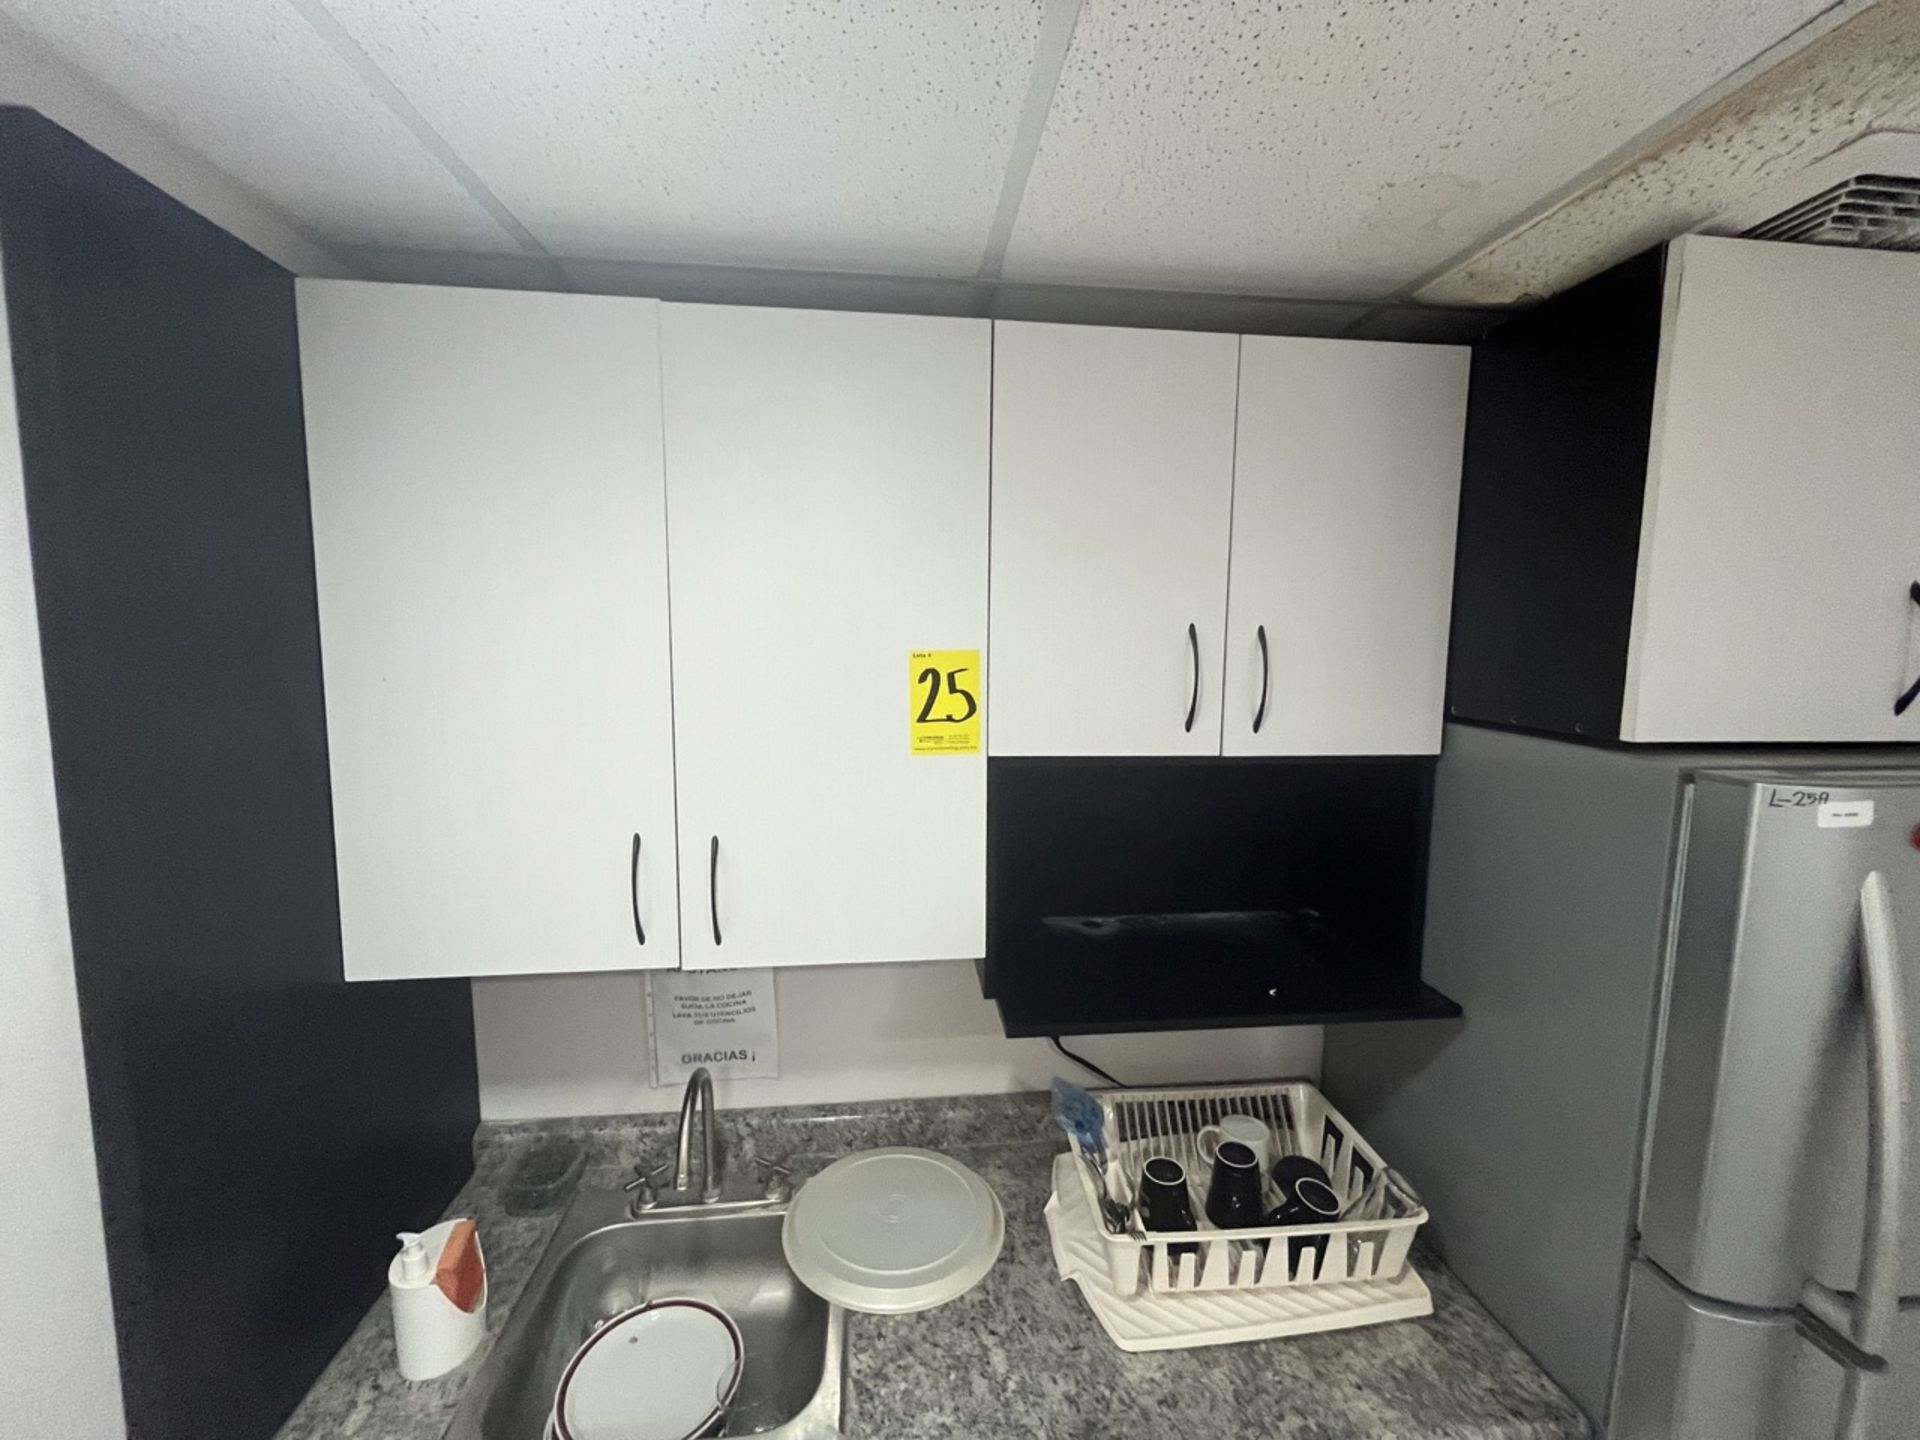 Kitchen station with melamine cover , single stainless steel sink and with mixer tap, measuring app - Image 2 of 8